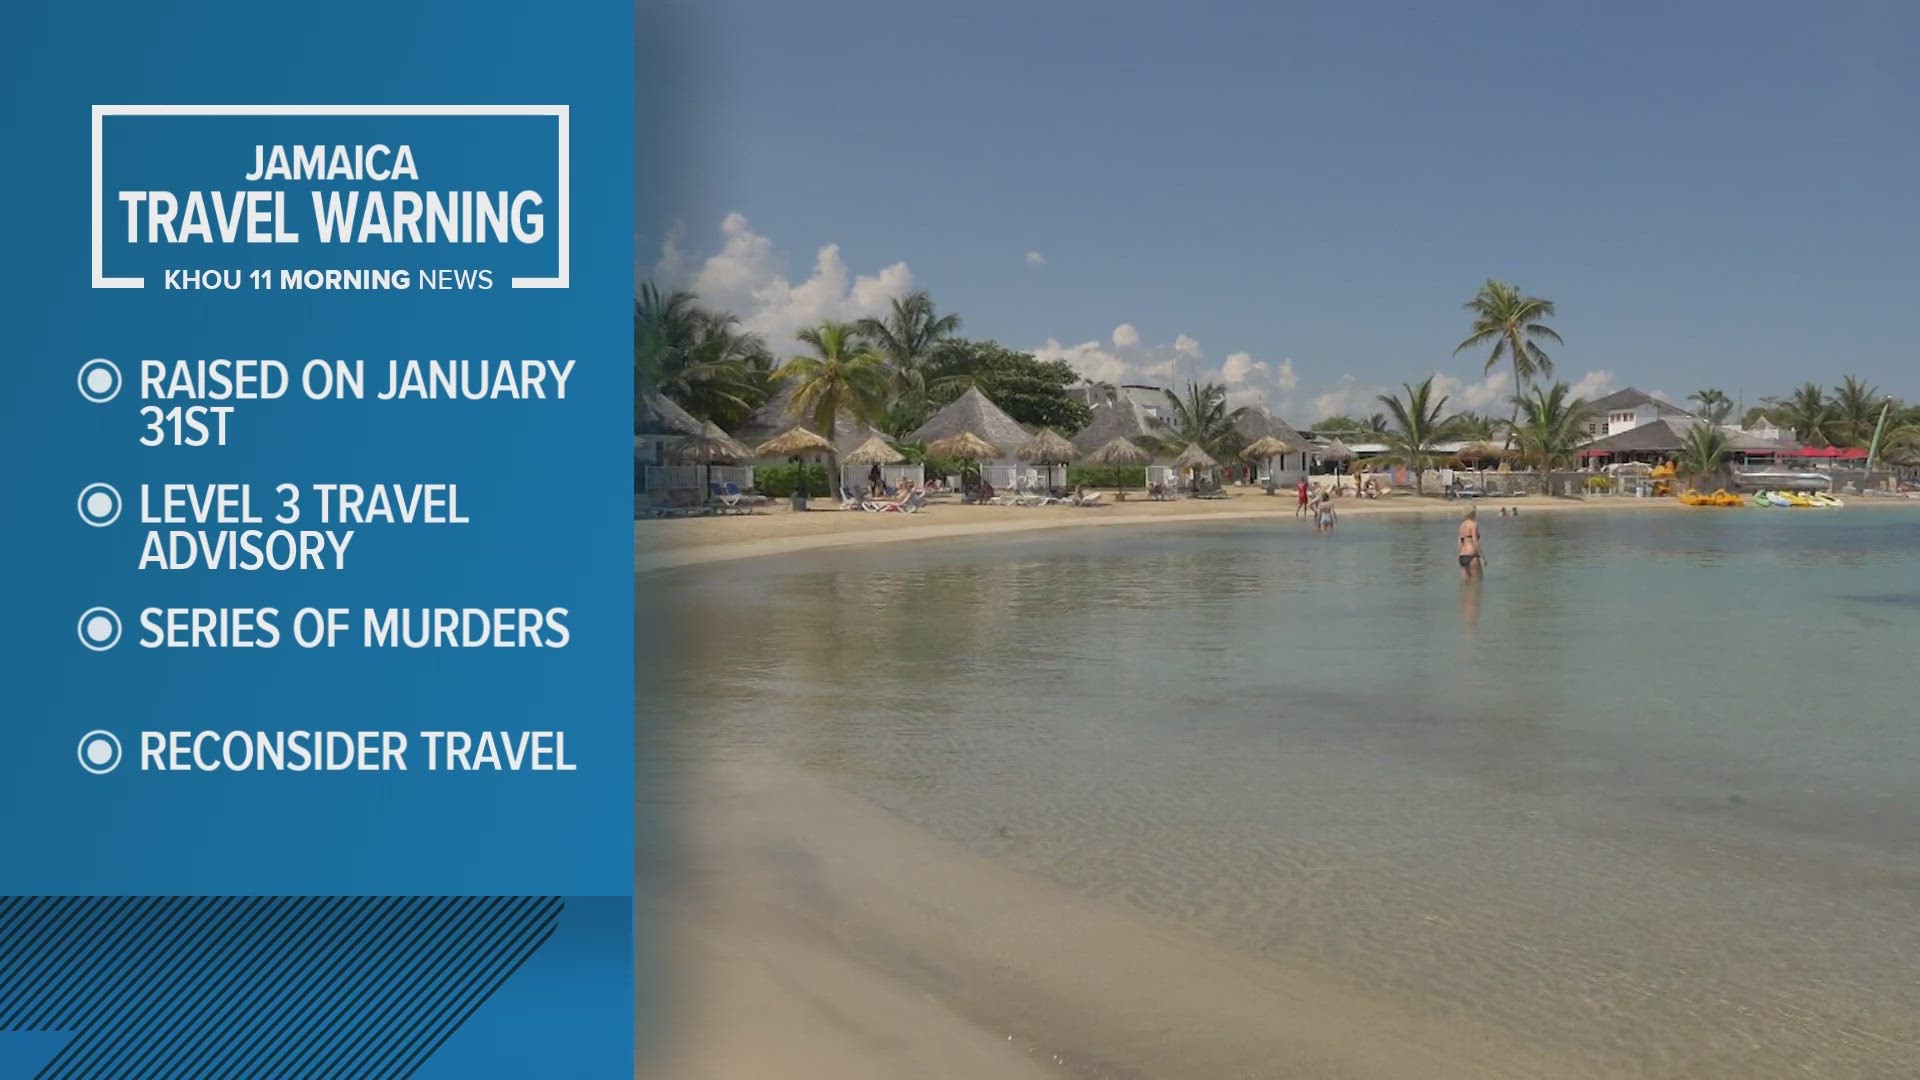 Two new travel warnings could derail vacation plans for Americans.